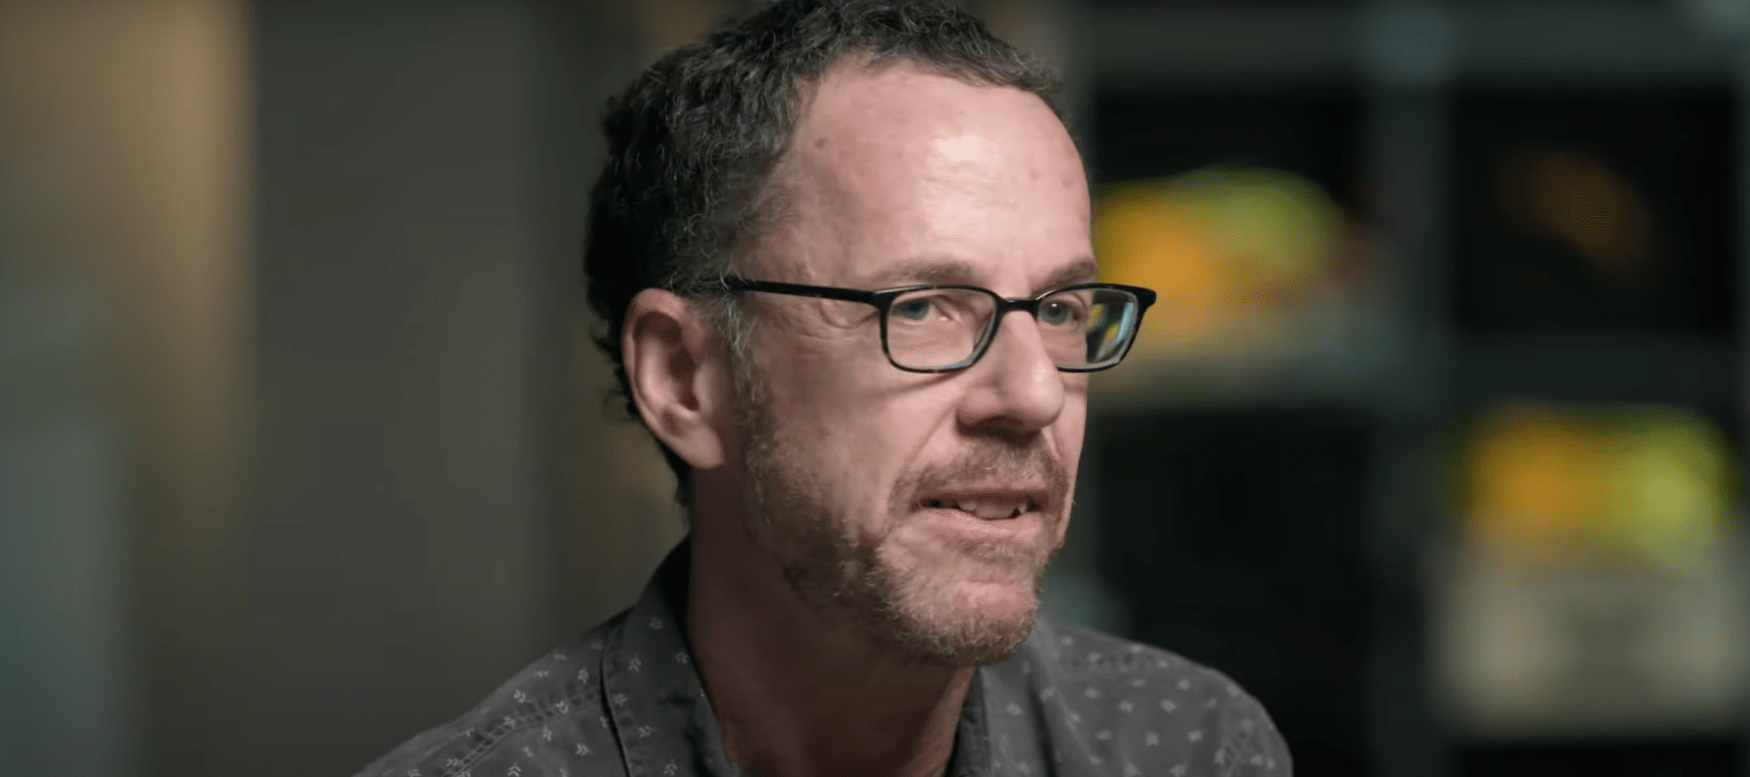 Ethan Coen to Reportedly Direct ‘Honey Don’t’ Next